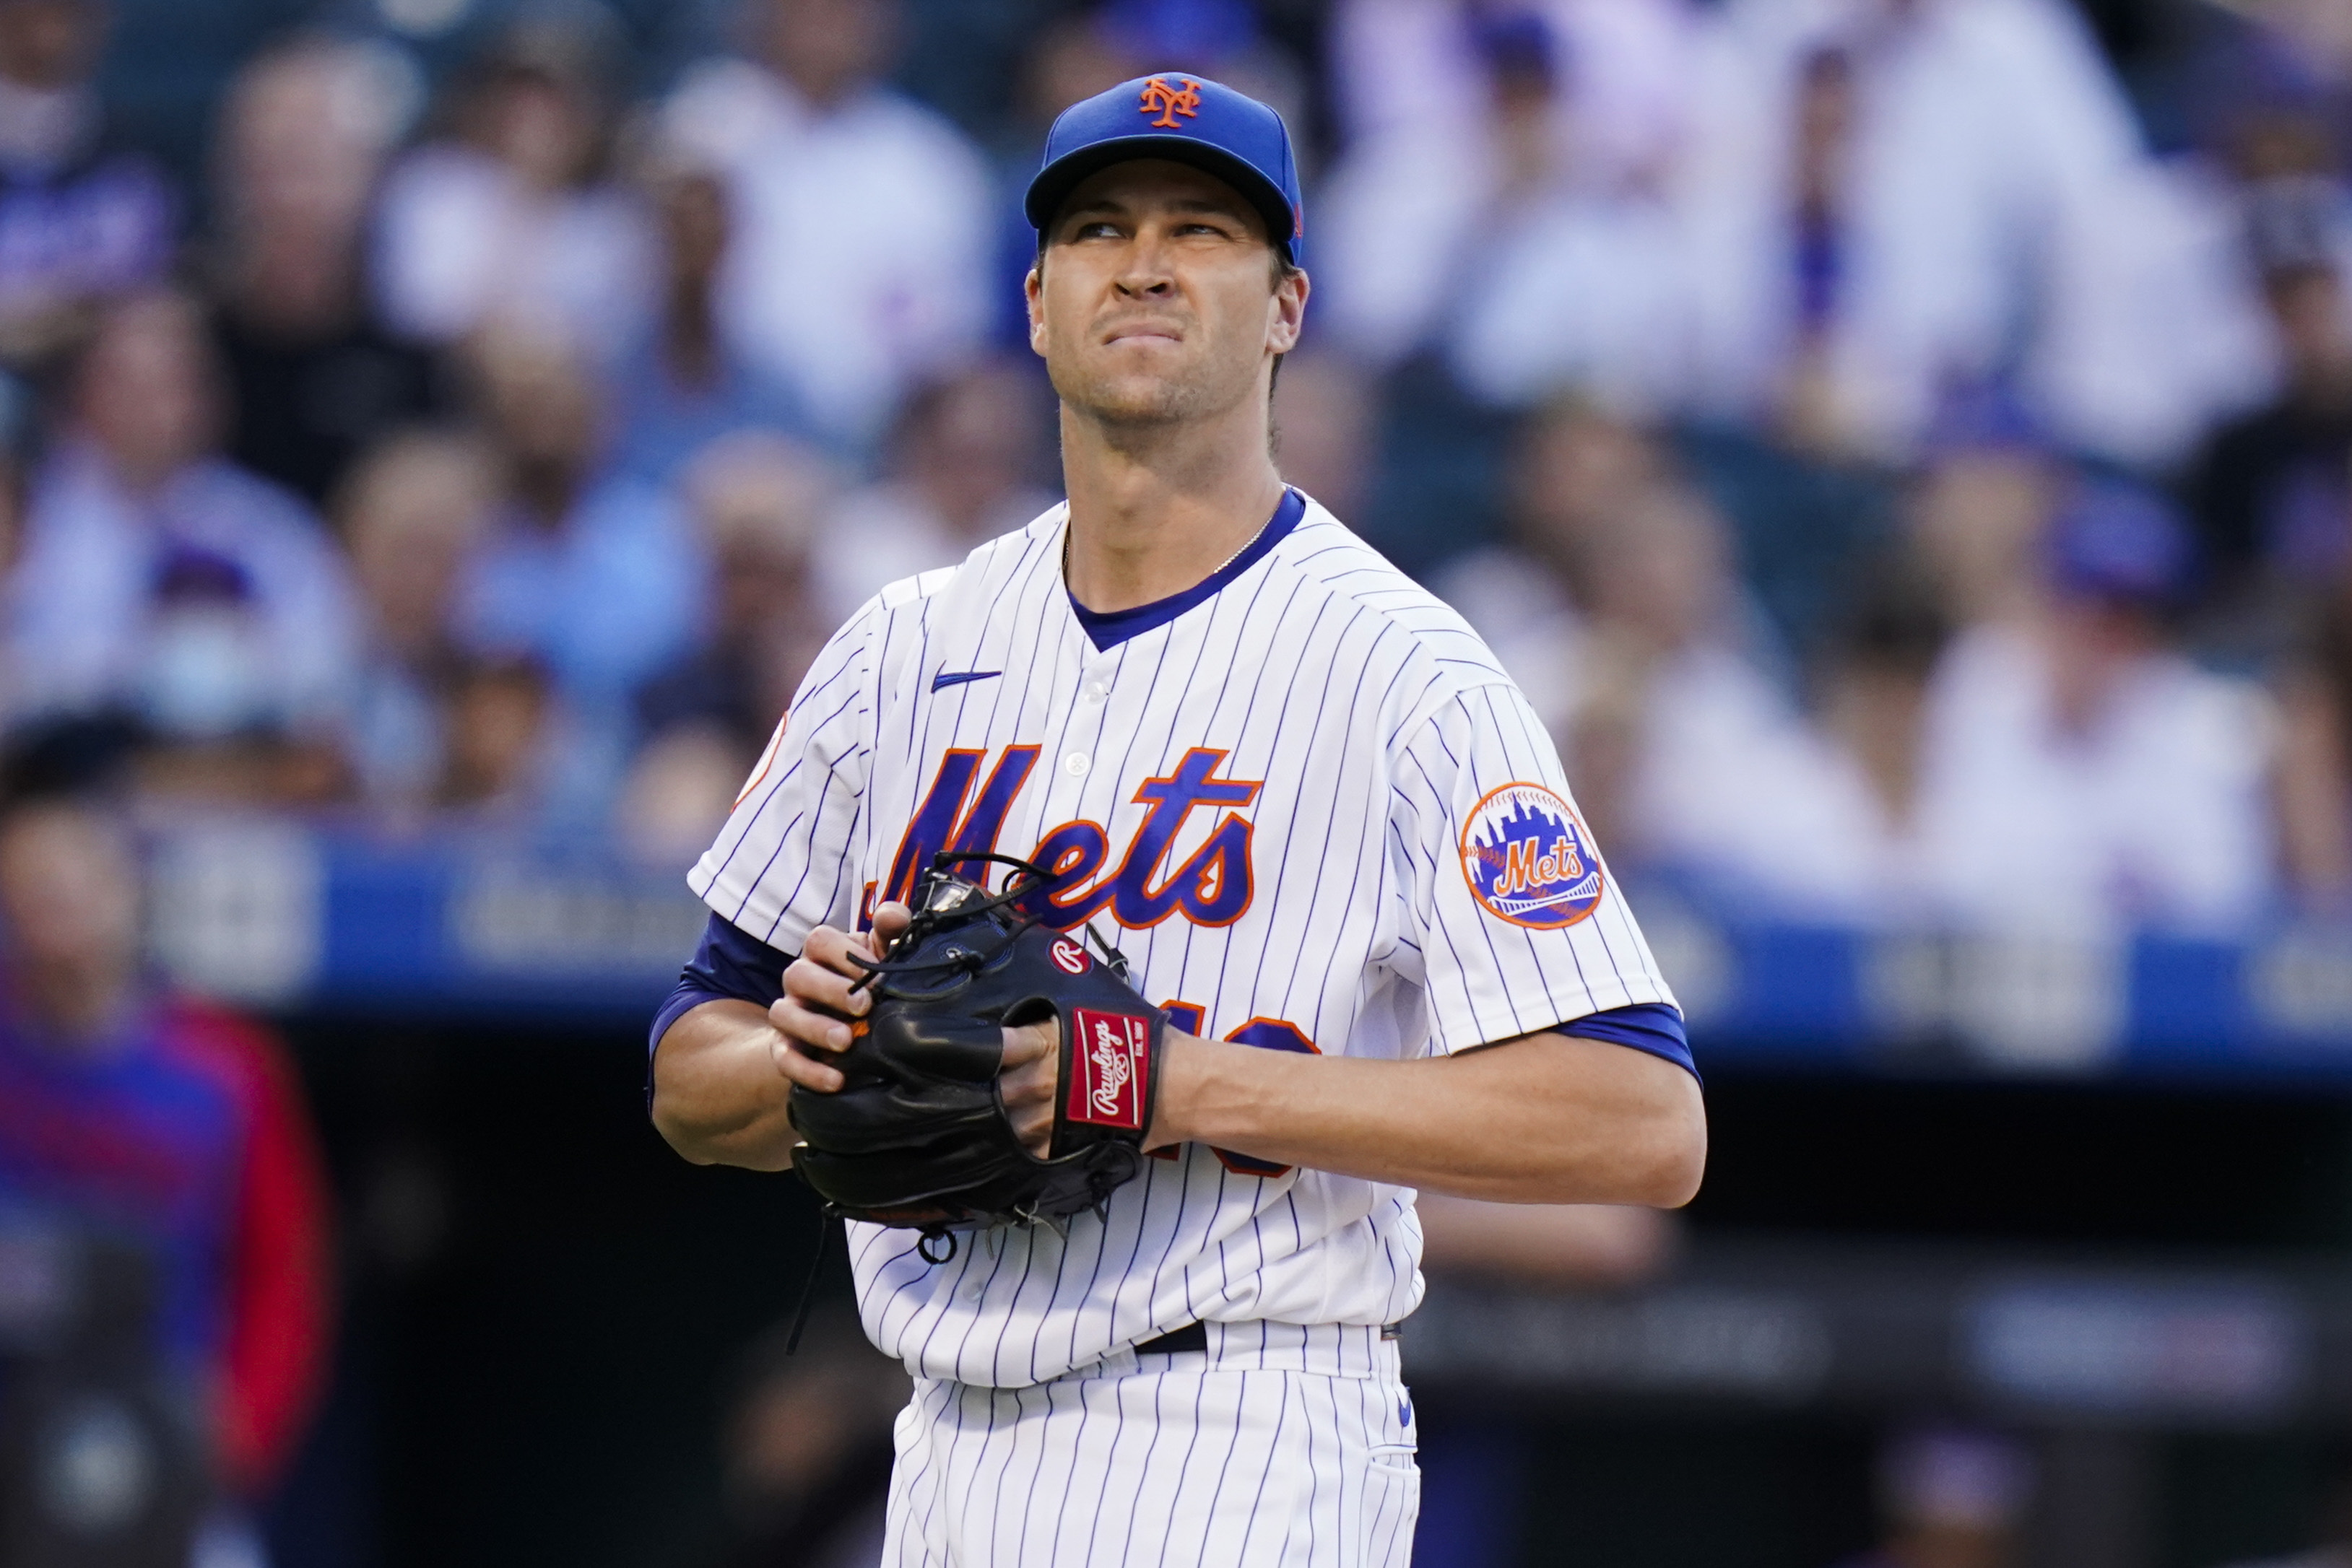 Jacob deGrom leaves Mets game vs. Cubs early due to shoulder injury